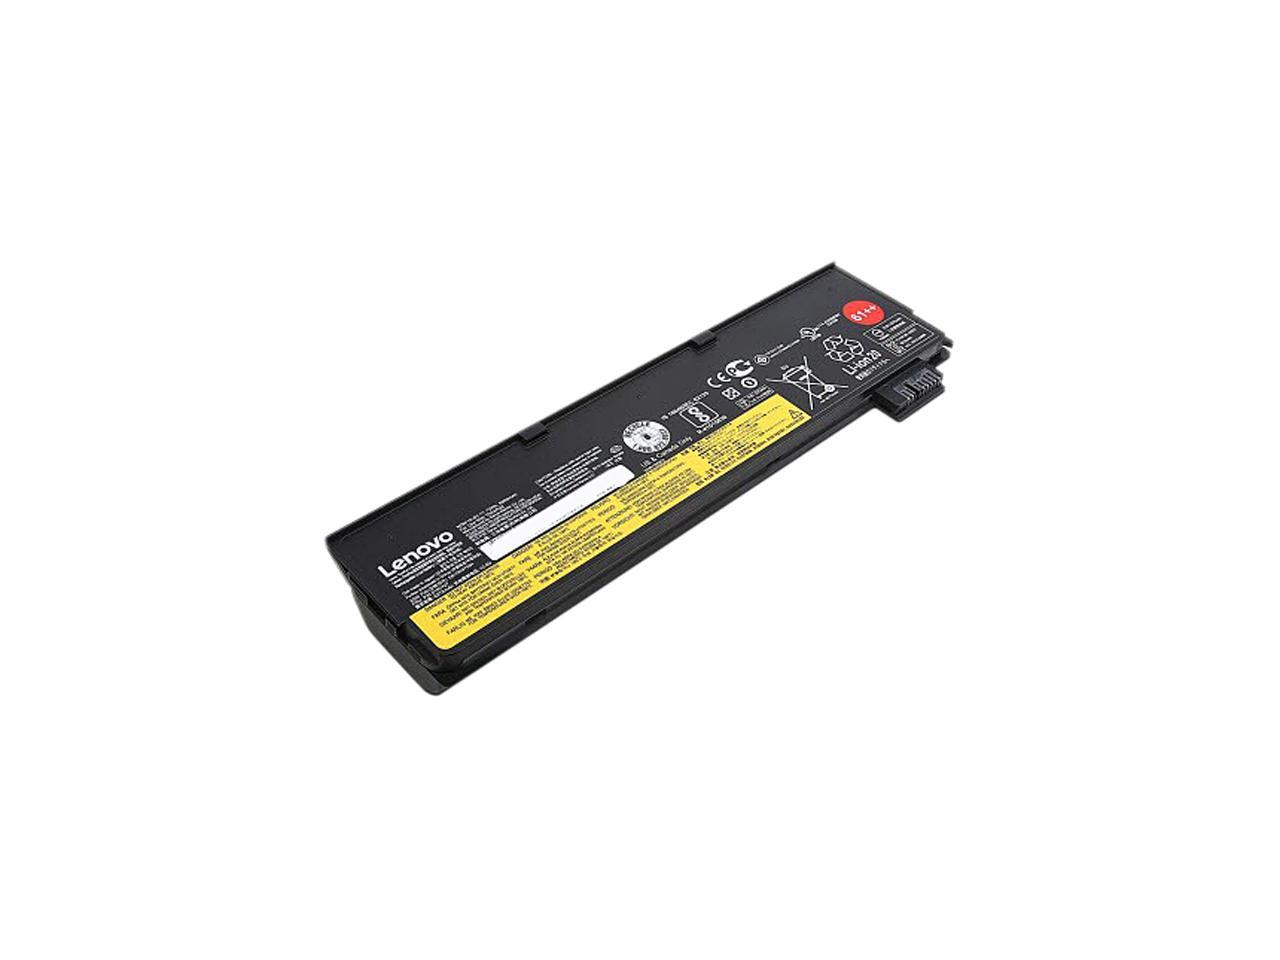 Lenovo 6-CELL ThinkPad Battery 61++, 72 Wh, For P51S ,P52S, T470, T480, T570, T580, TP25, 4X50M08812